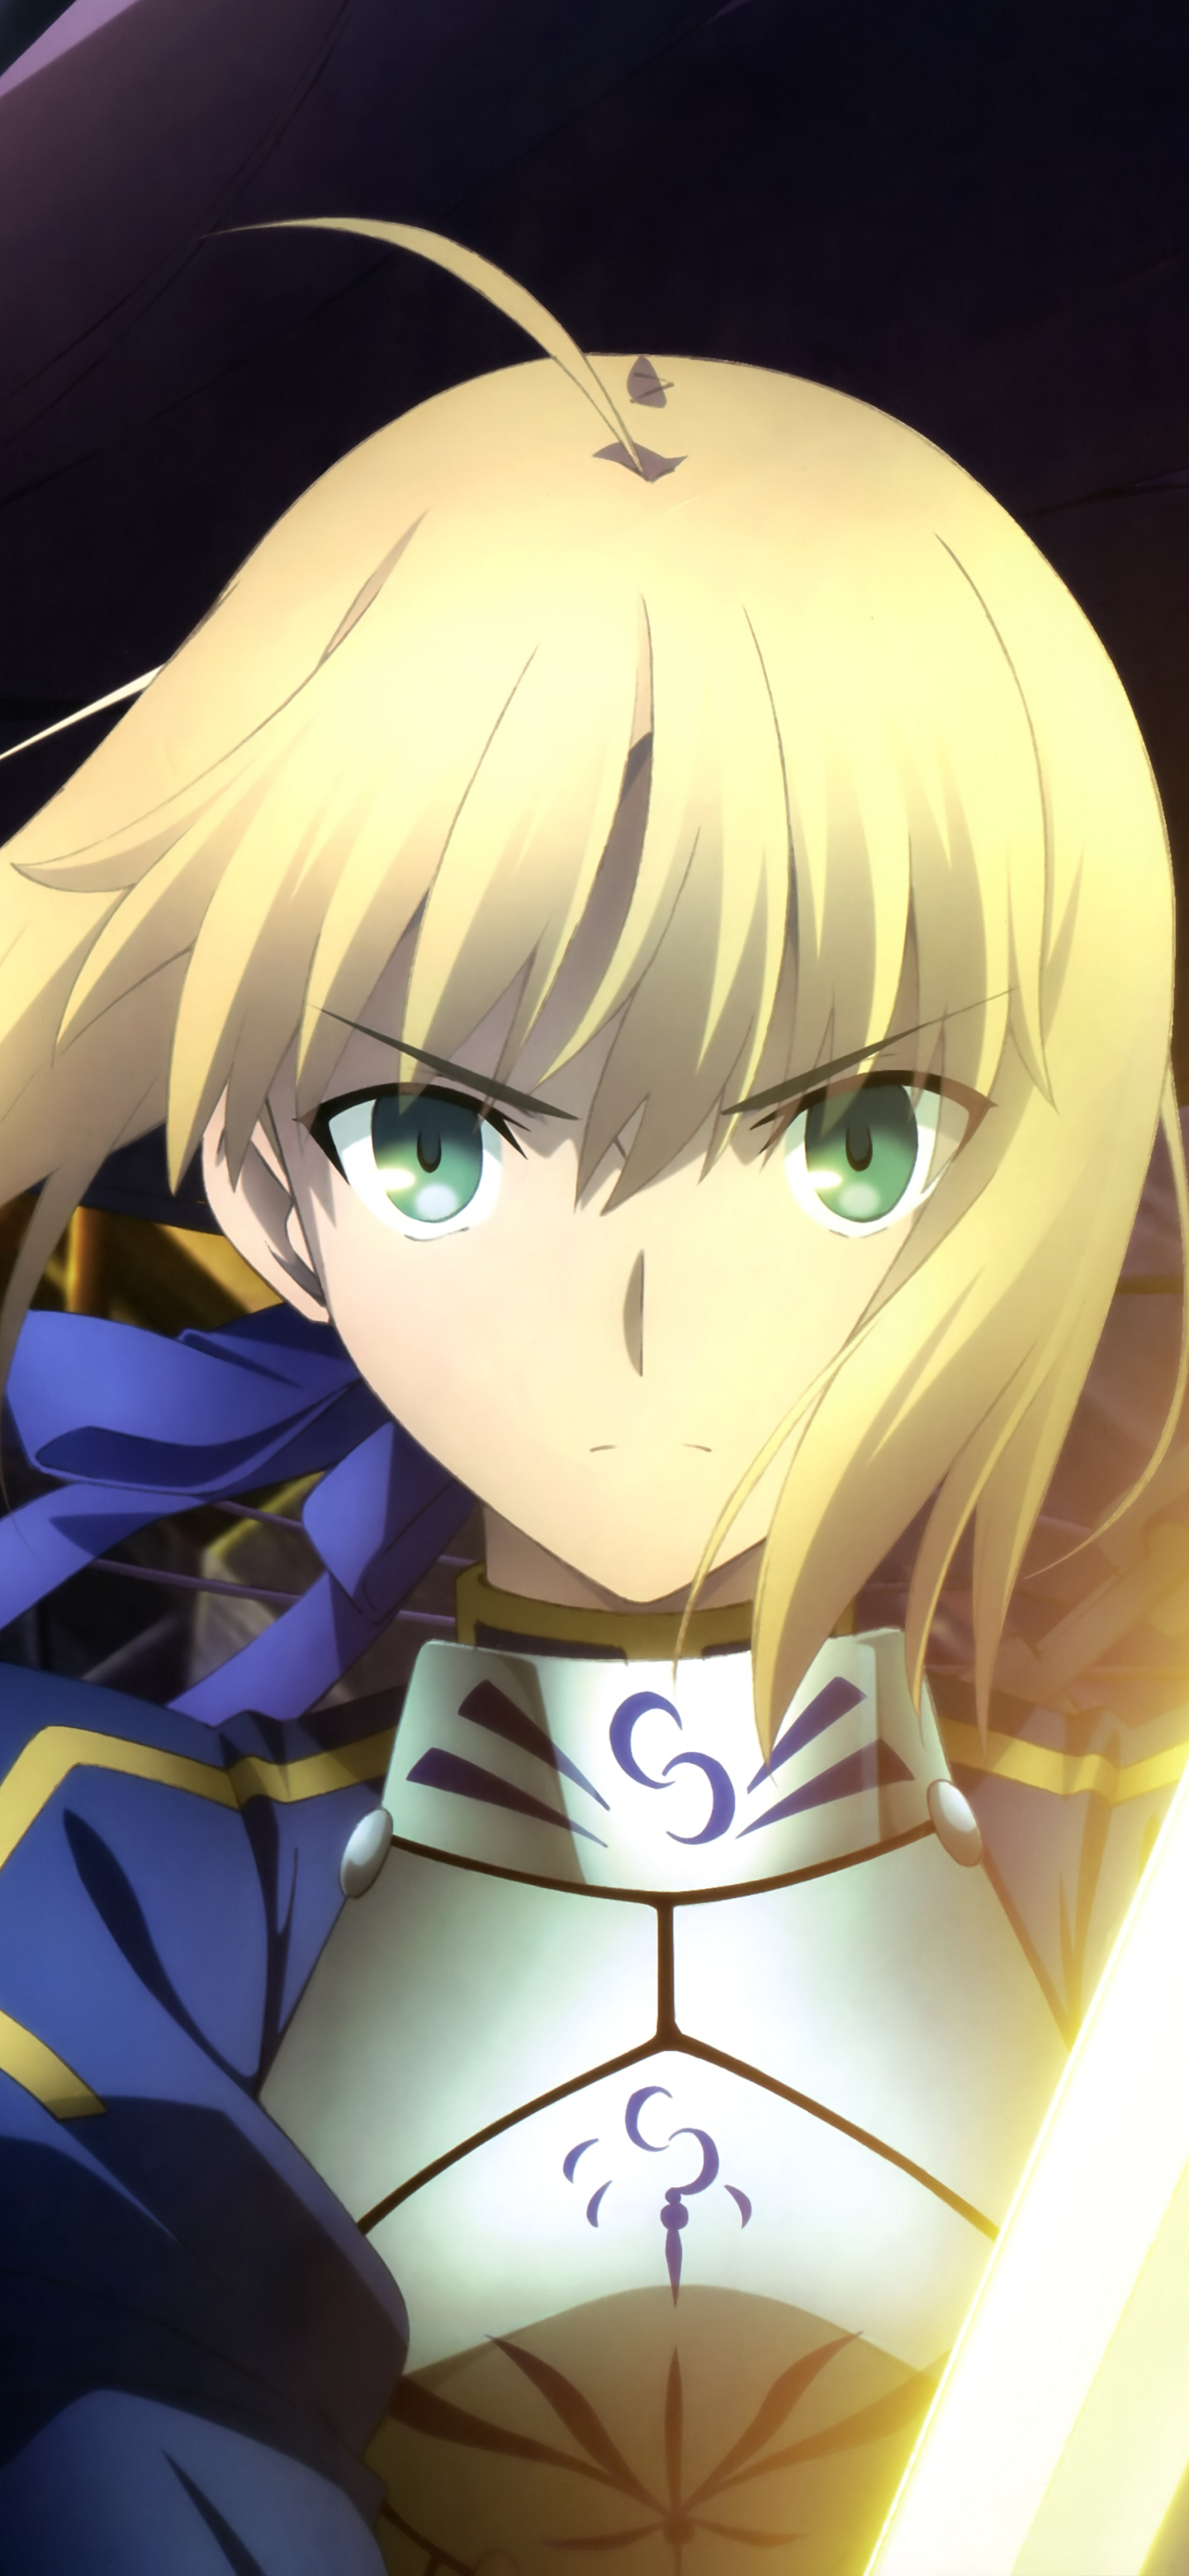 Fate/Stay Night Phone Wallpaper